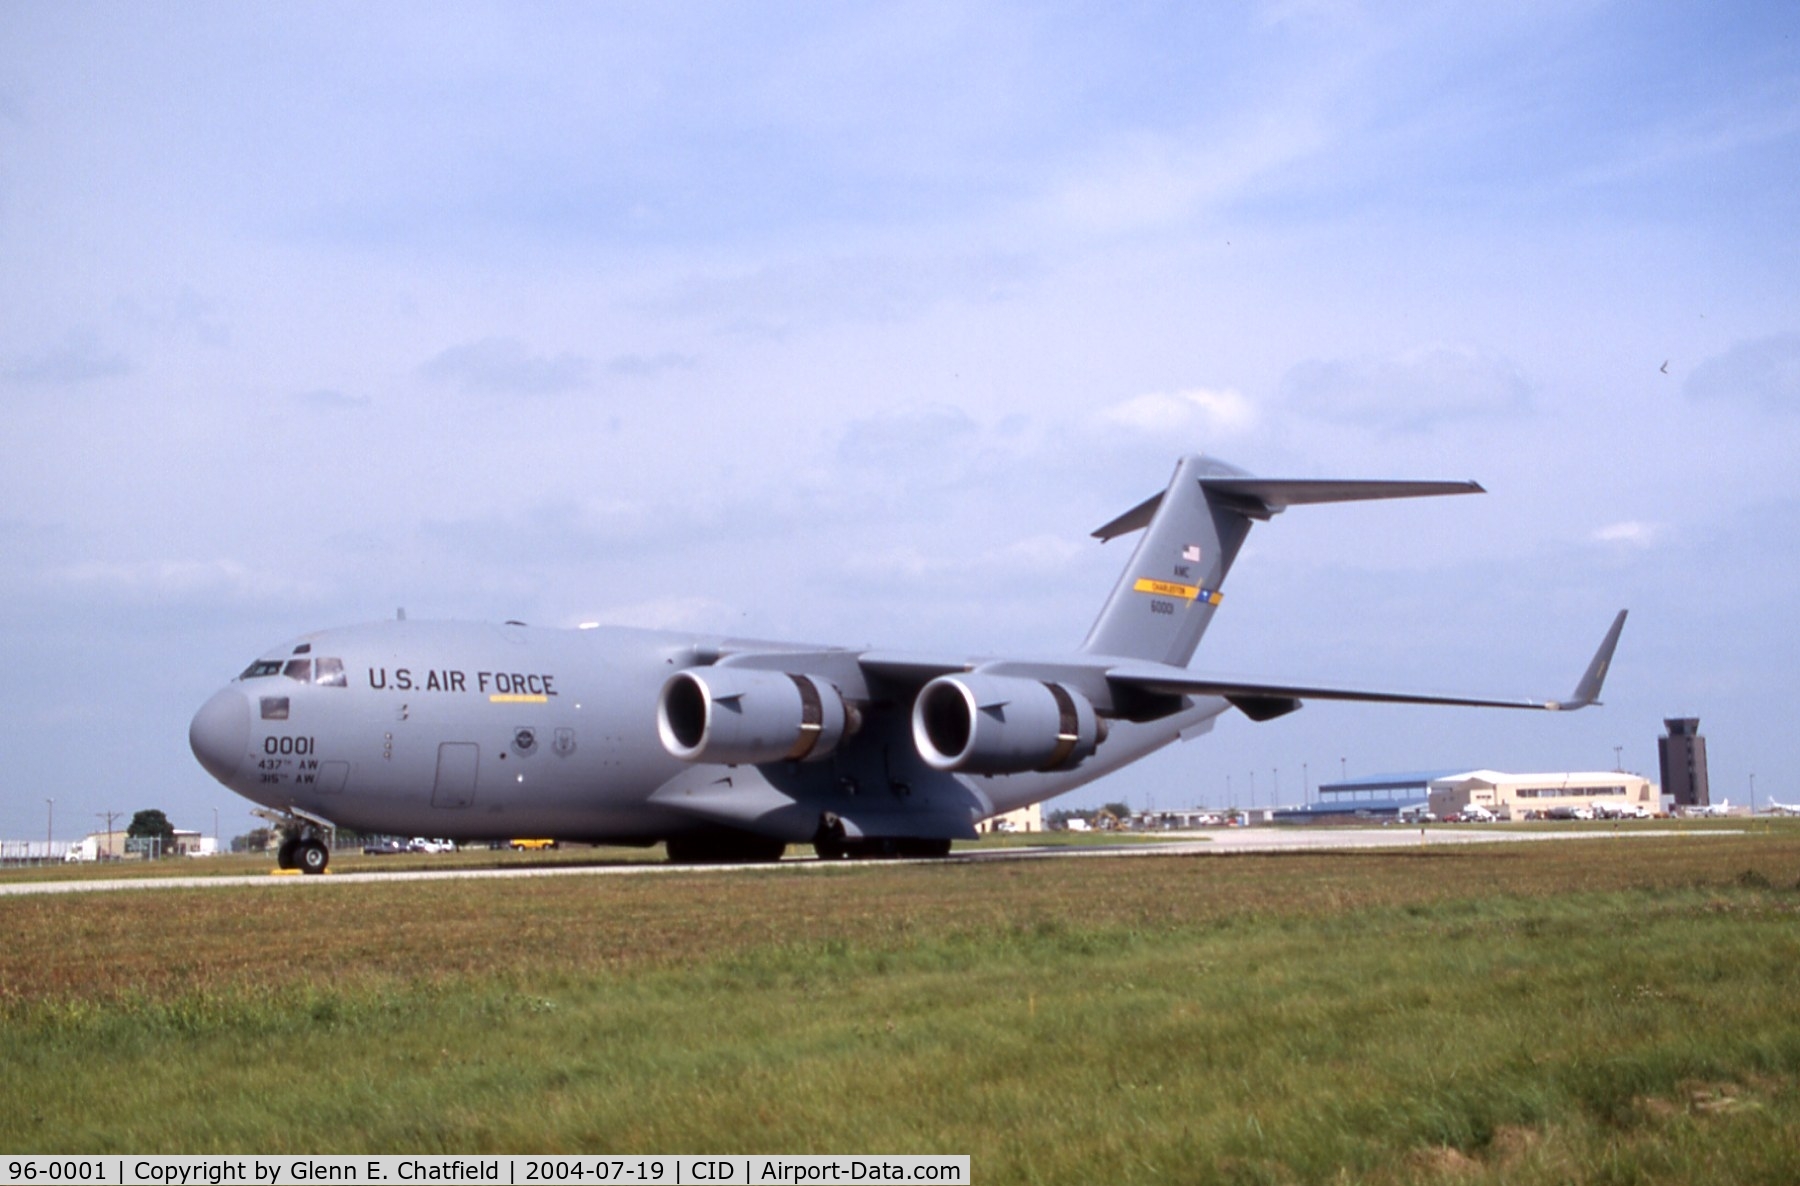 96-0001, 1996 McDonnell Douglas C-17A Globemaster III C/N P-33, C-17A on taxiway D by Rockwell-Collins